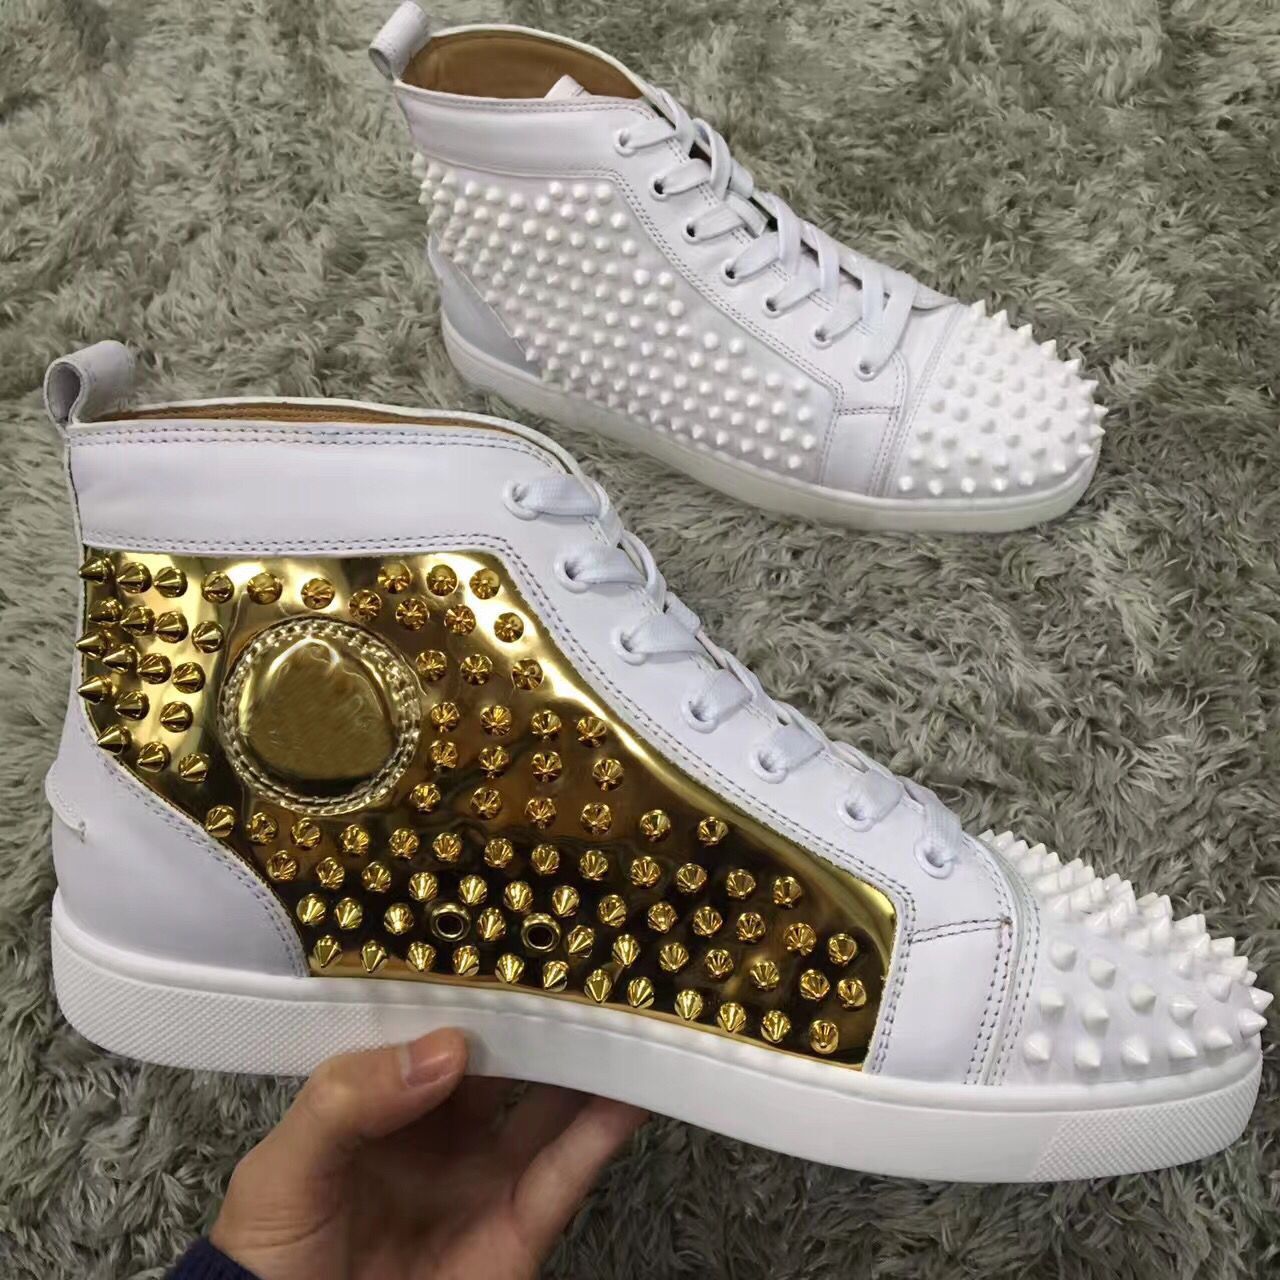 Cheap Luxurious Band High Top Spikes Red Bottom Sneakers Shoes For Women,Men Studs Red Sole ...